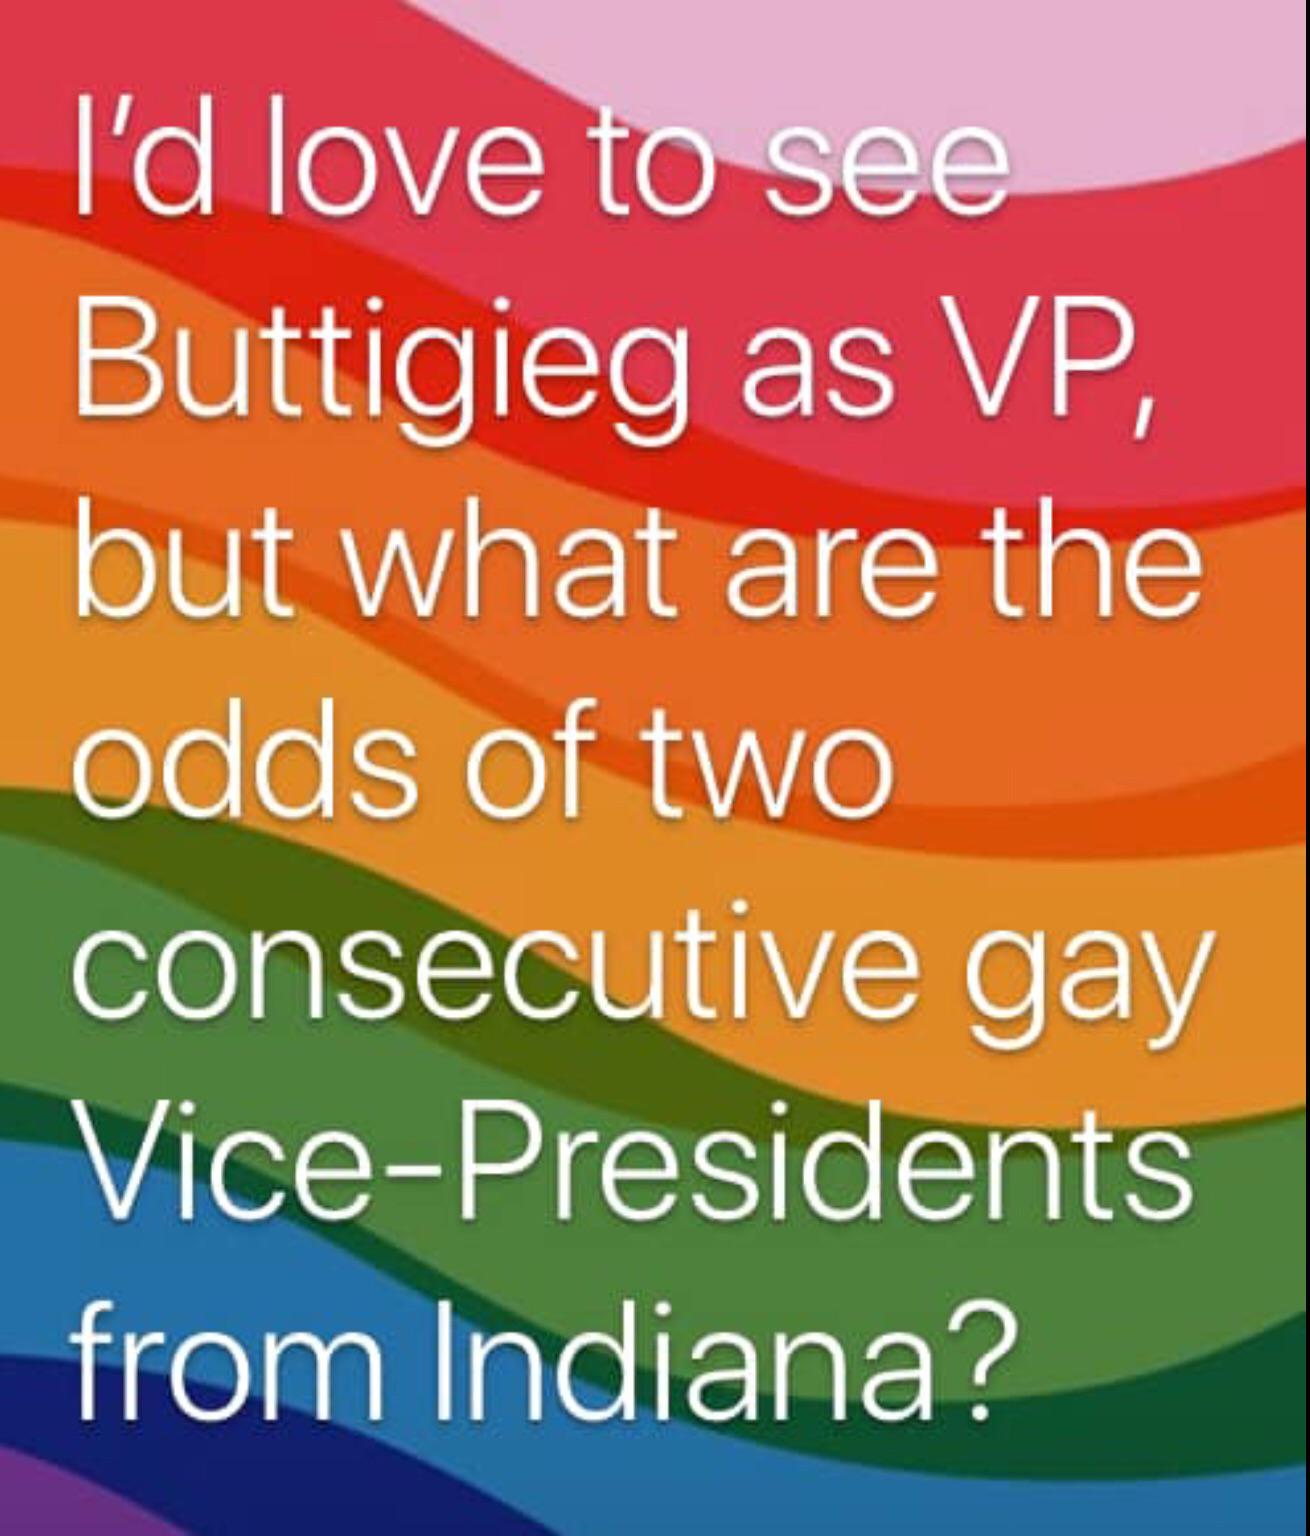 graphics - I'd love to see Buttigieg as Vp, but what are the odds of two consecutive gay VicePresidents from Indiana?